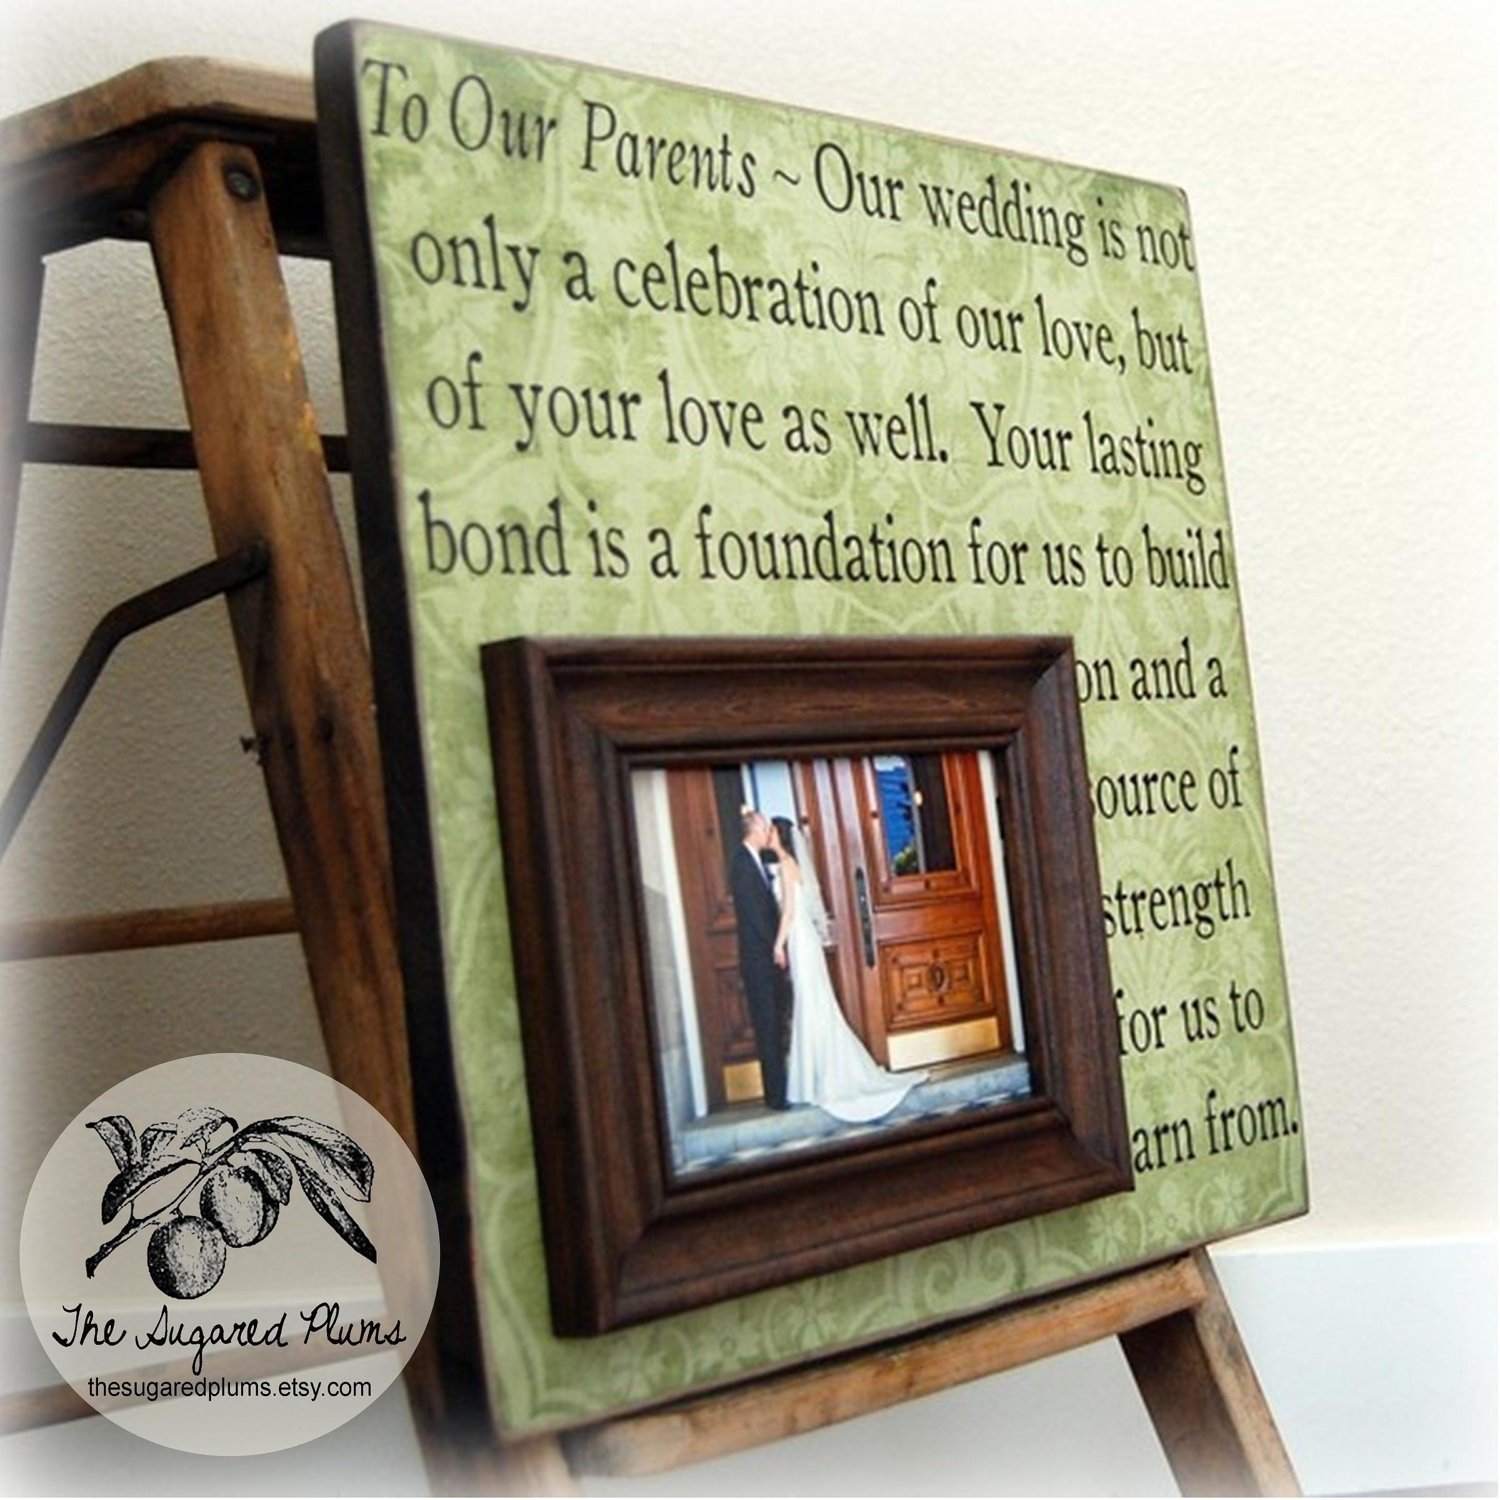 10 Lovable Wedding Gifts For Parents Ideas ideas for 50th wedding anniversary gifts for parents unique weding 2023